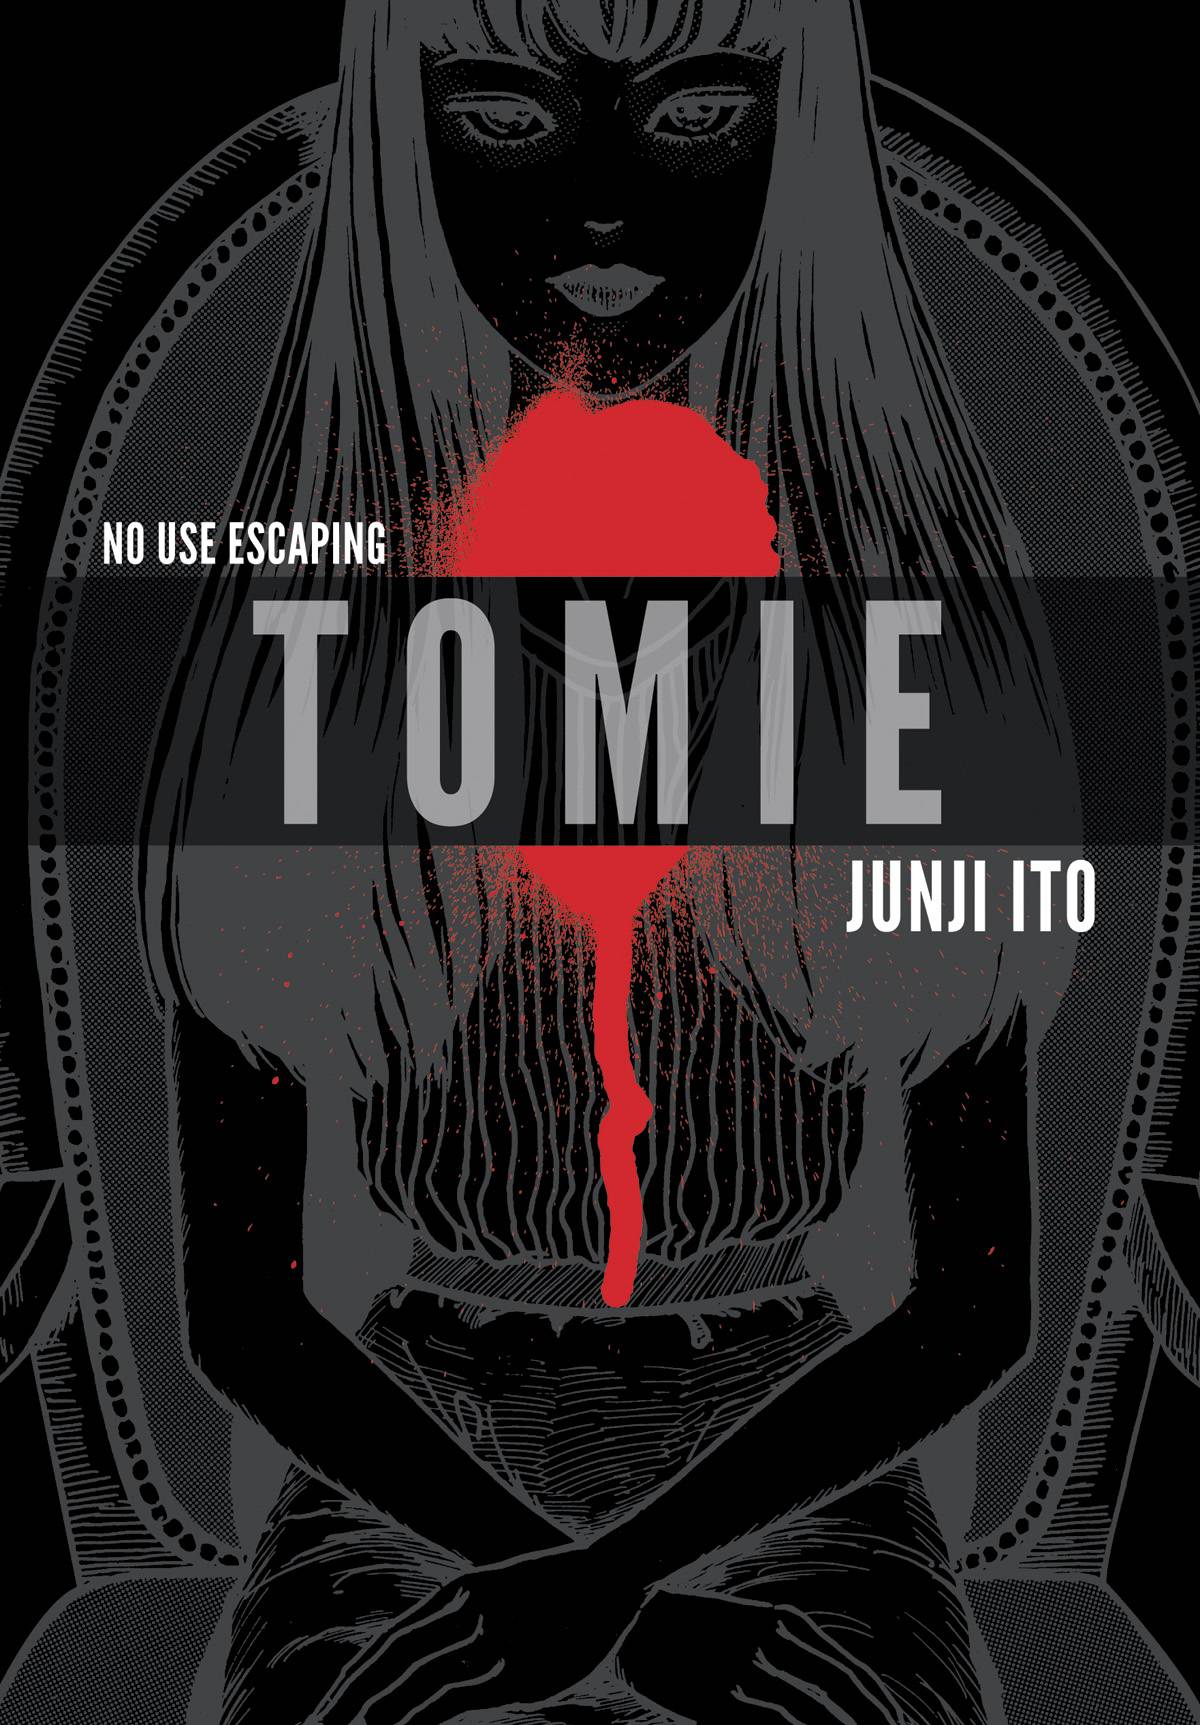 Tomie Complete Deluve Edition Hc Junji Ito